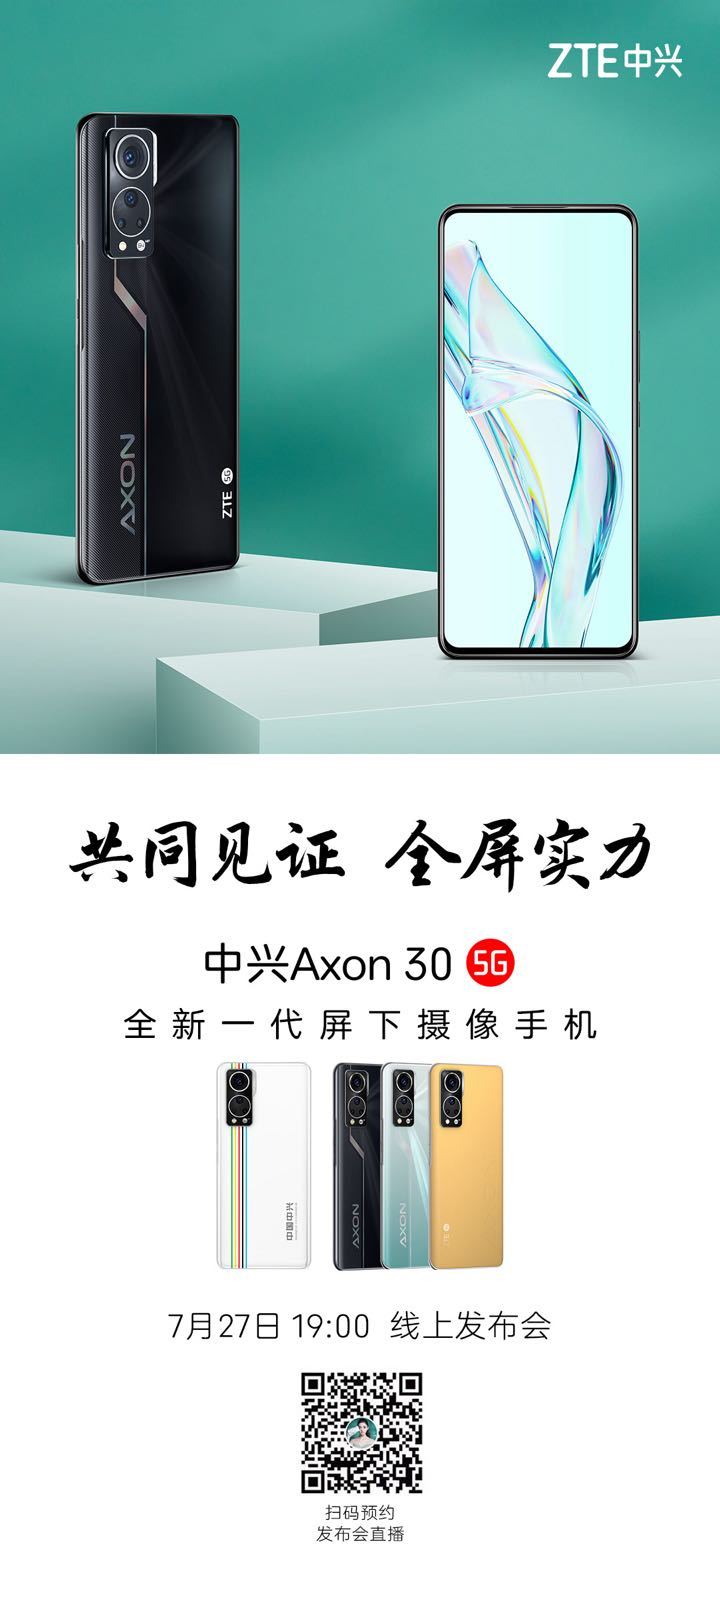 ZTE voluntarily spoils the Axon 30 design and colorway reveal ahead of launch. (Source: ZTE)